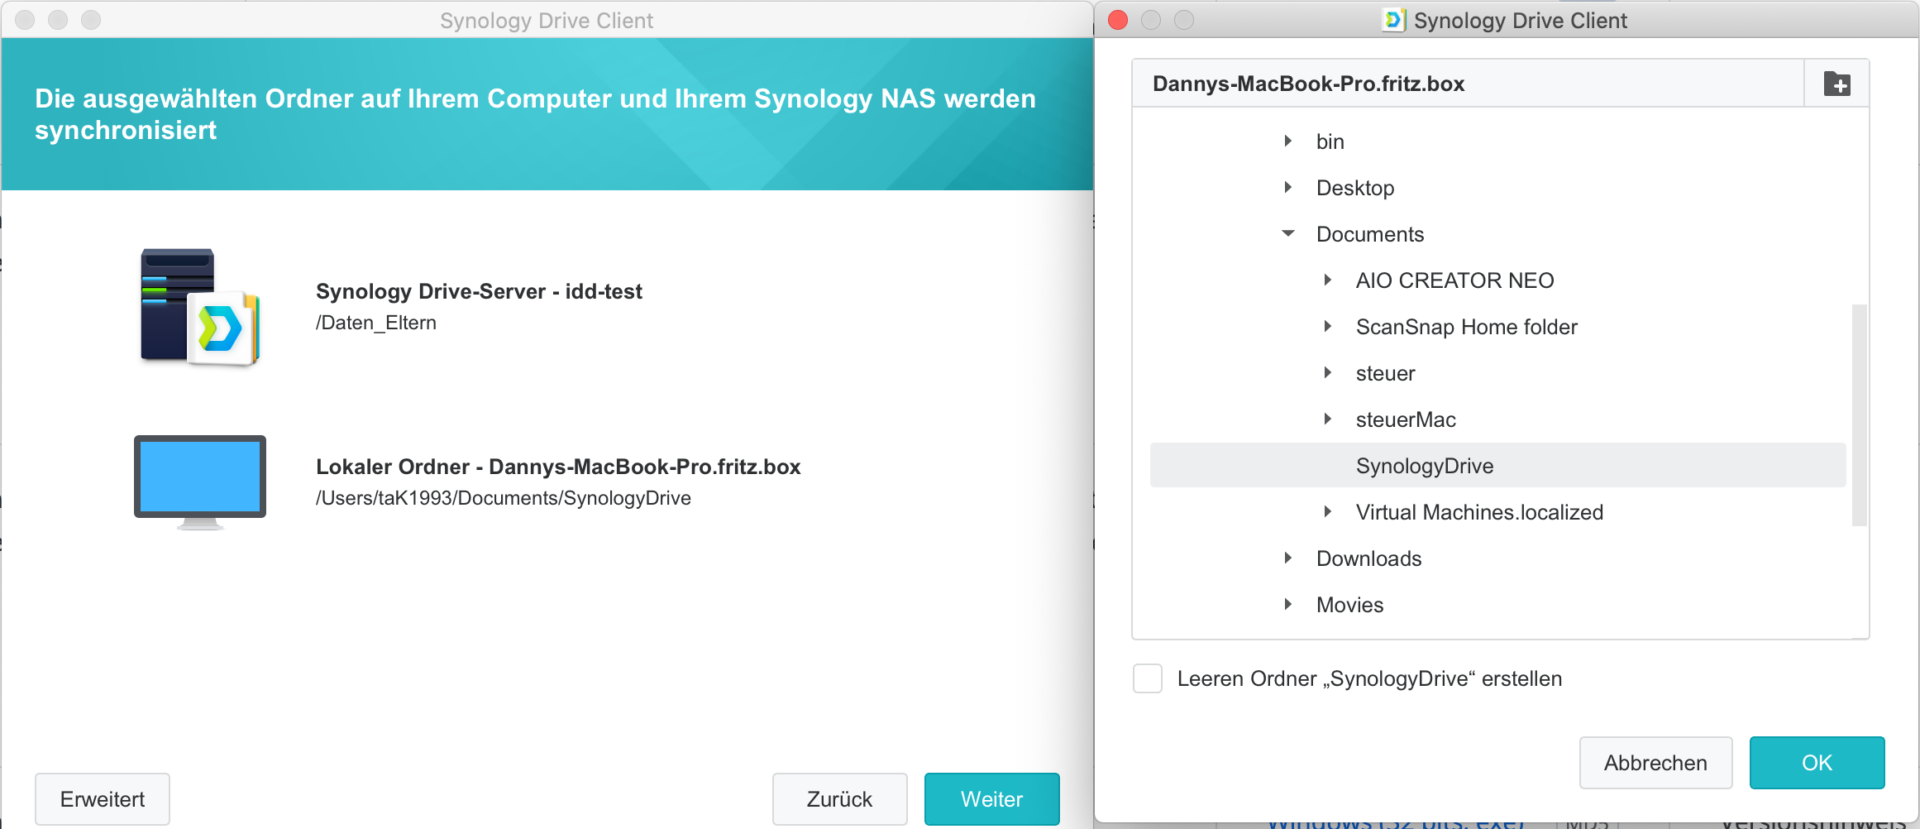 synology drive client